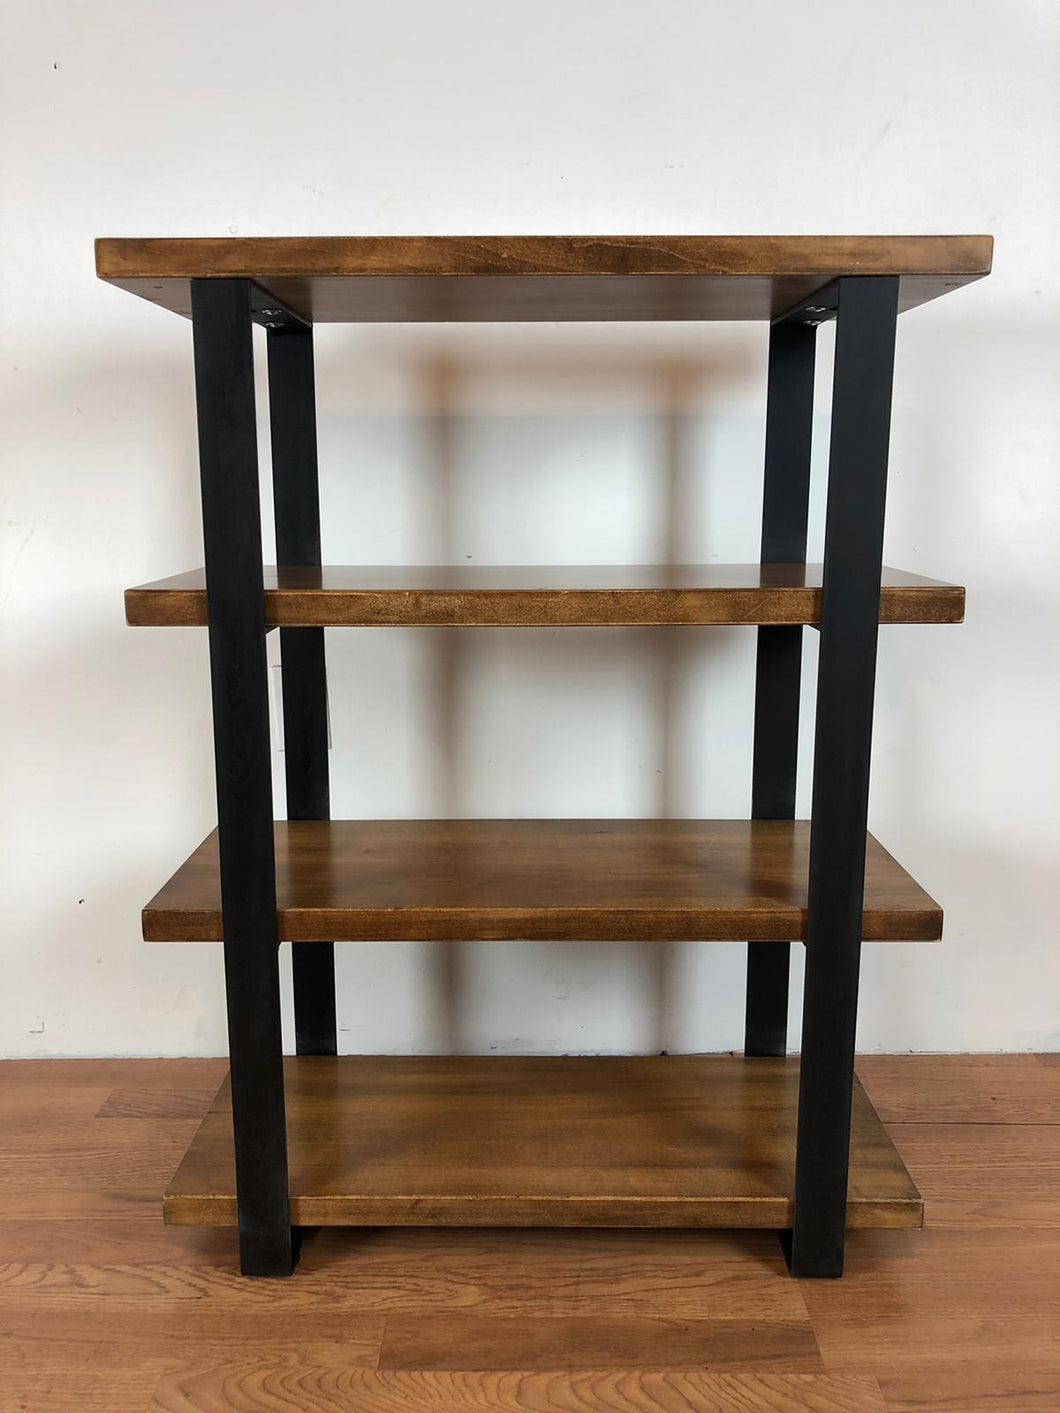 Bookcase maple wood in antique walnut stain